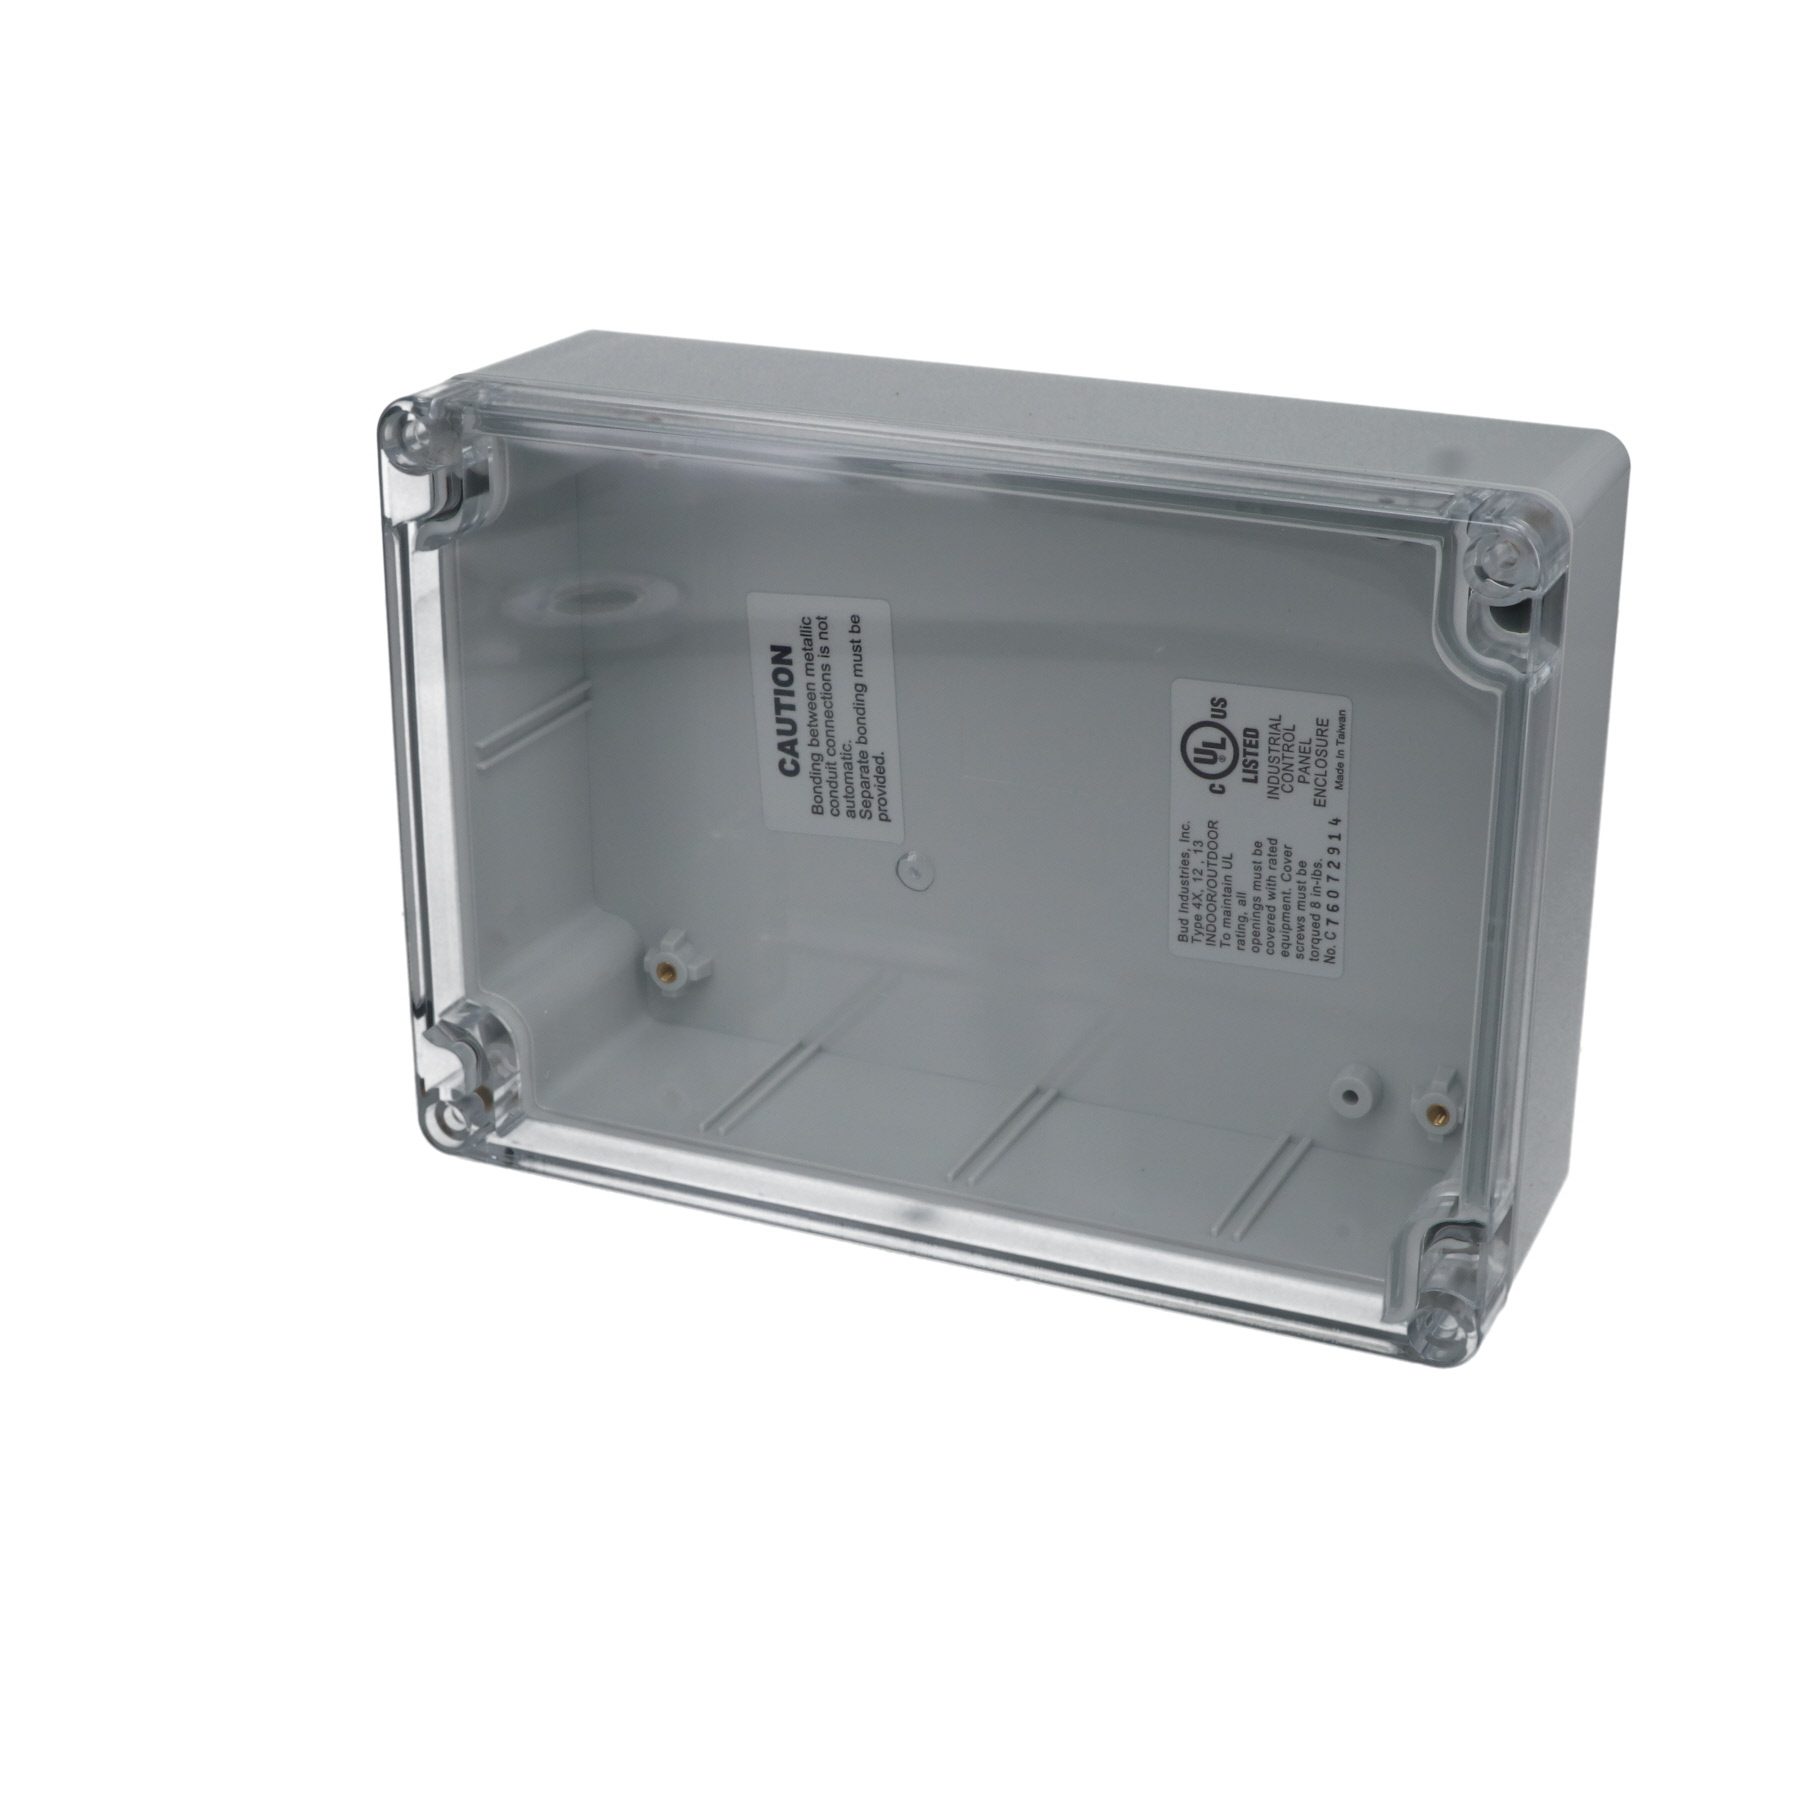 IP65 NEMA 4X Box with Clear Cover PN-1324-C